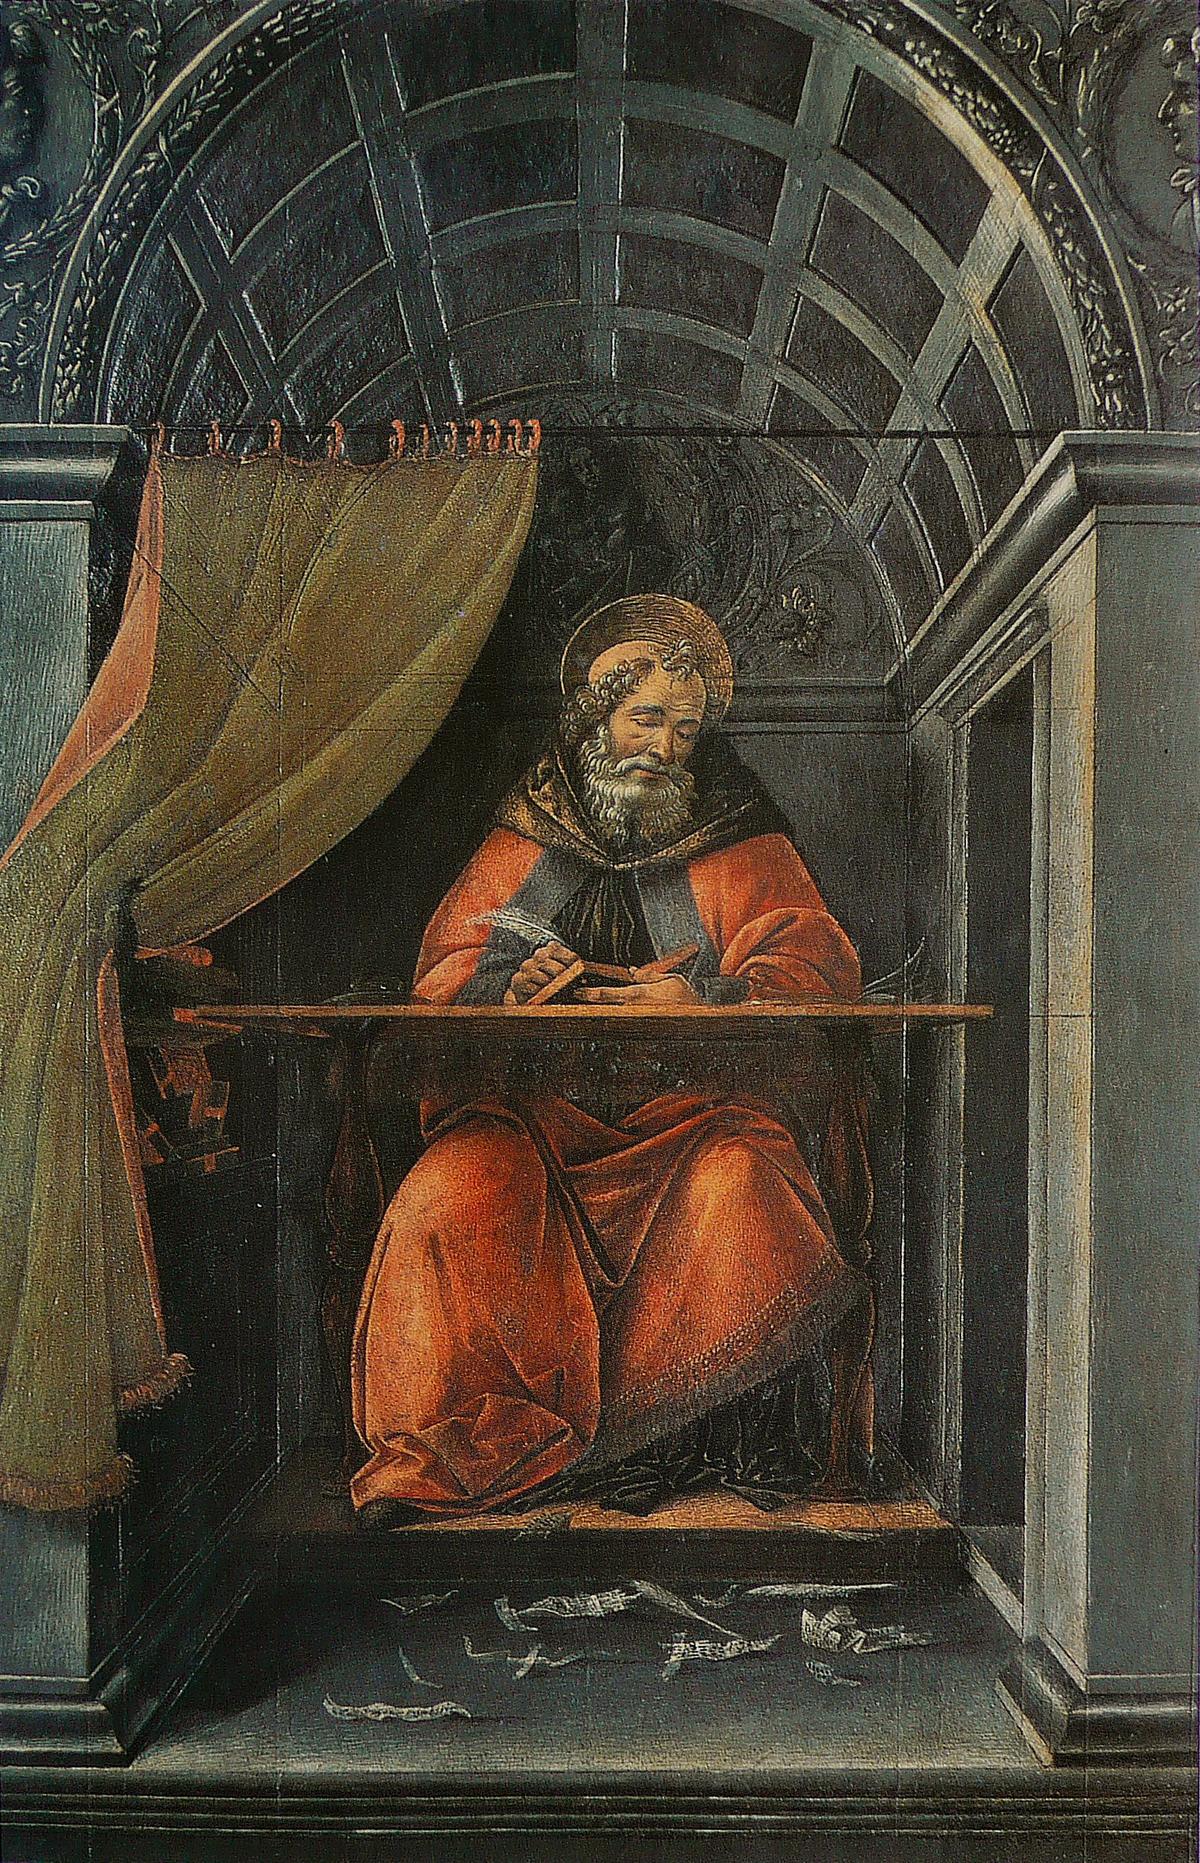 "St. Augustine in His Cell," between 1490 and 1494, by Sandro Botticelli. Tempera on panel. Uffizi Gallery, Florence, Italy. (Public Domain)